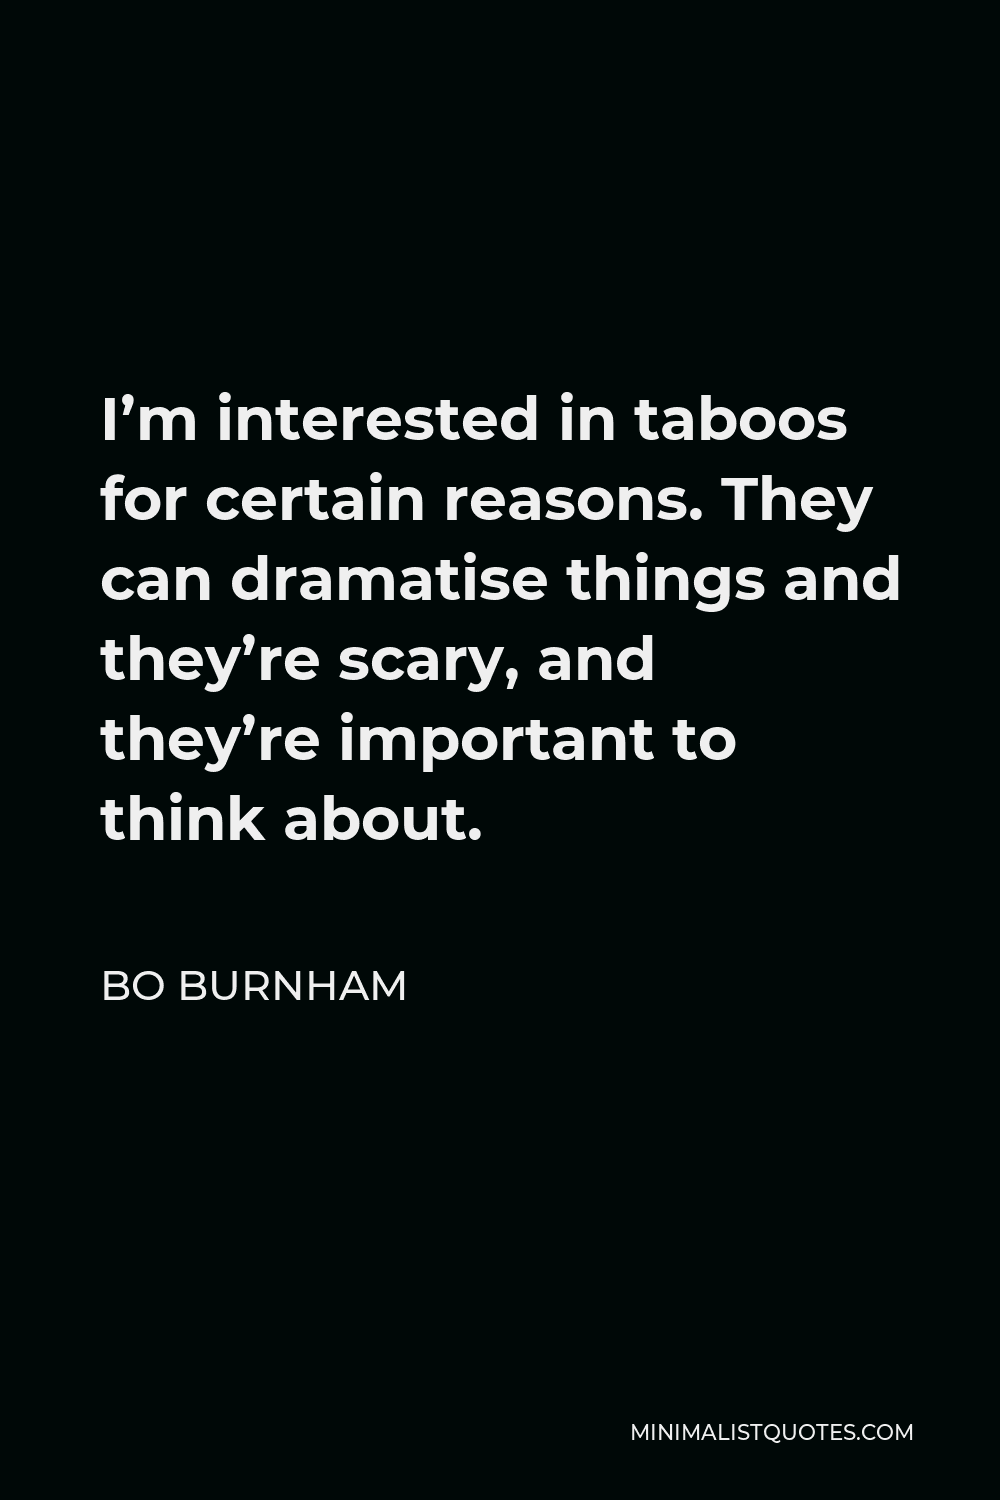 Bo Burnham Quote - I’m interested in taboos for certain reasons. They can dramatise things and they’re scary, and they’re important to think about.